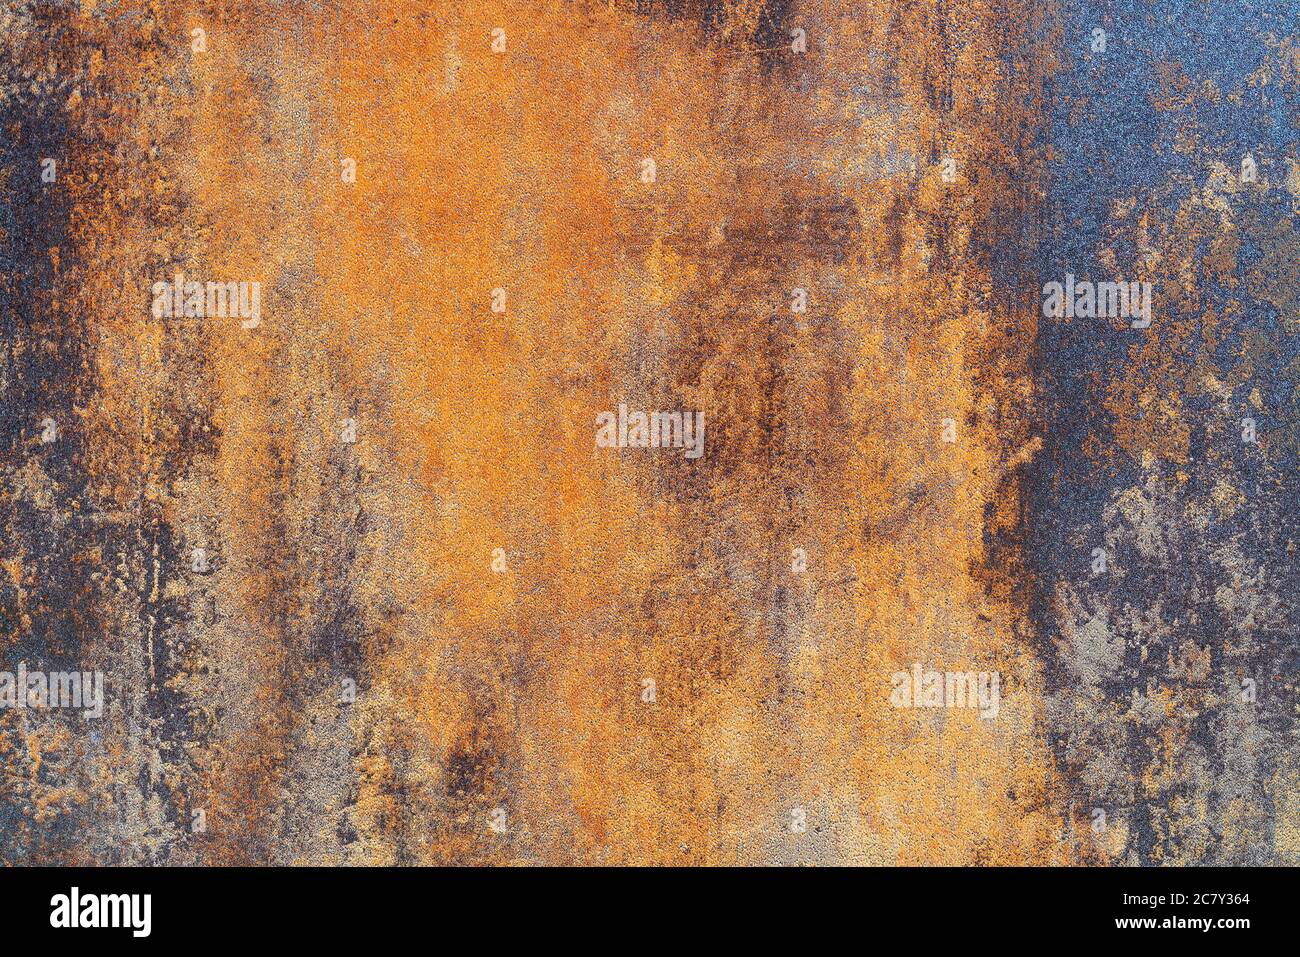 Rusty metal texture. Metal surface. Rusty background. Stock Photo